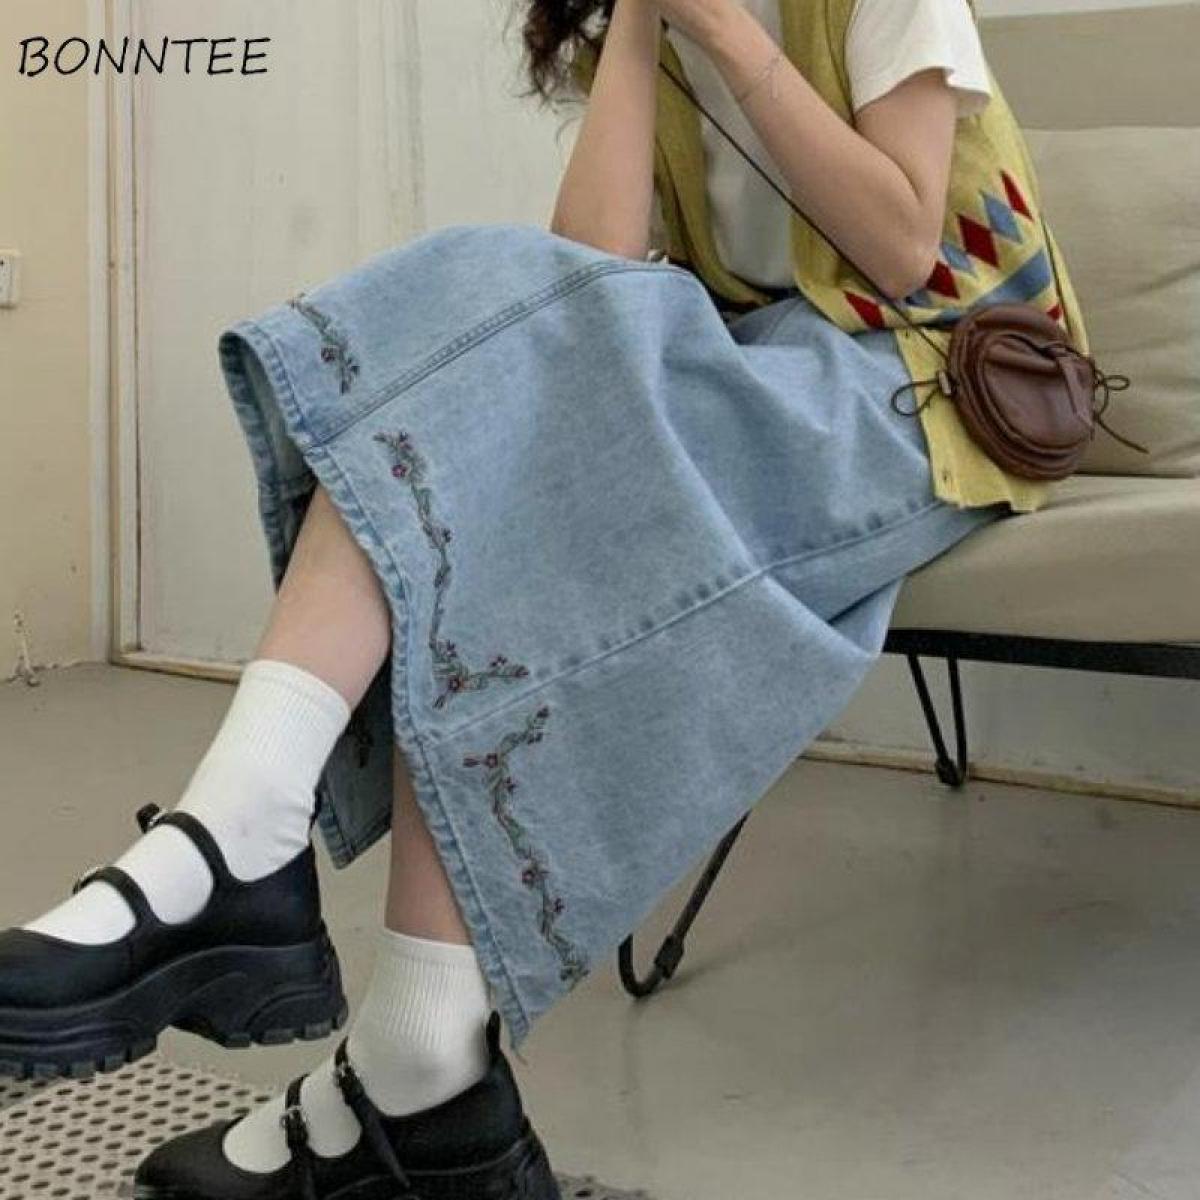 Skirts Women Denim Flower Vintage Embroidery Mid Calf A Line All Match  Style Fashion Design Basic Retro Spring Leisure